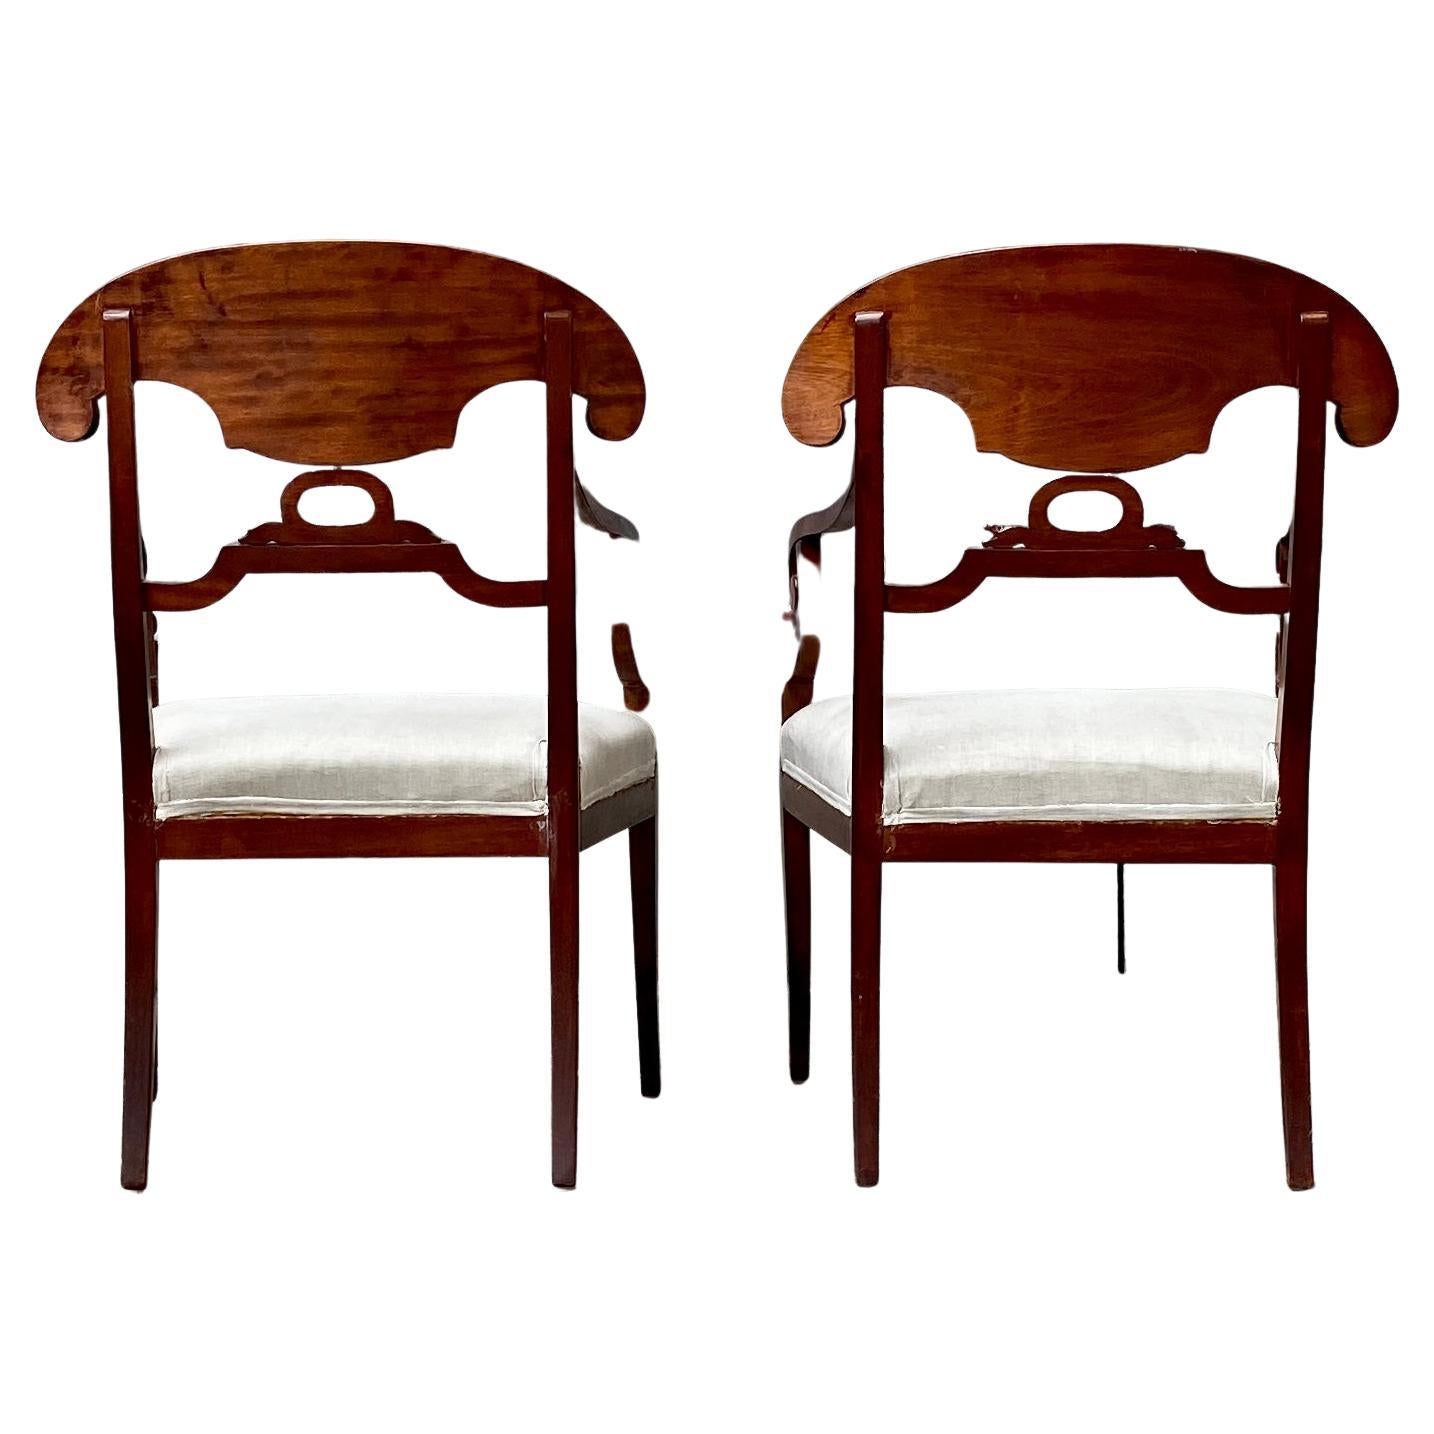 Hand-Crafted Pair of Swedish Empire Mahogany Armchairs 19th Century Sweden For Sale